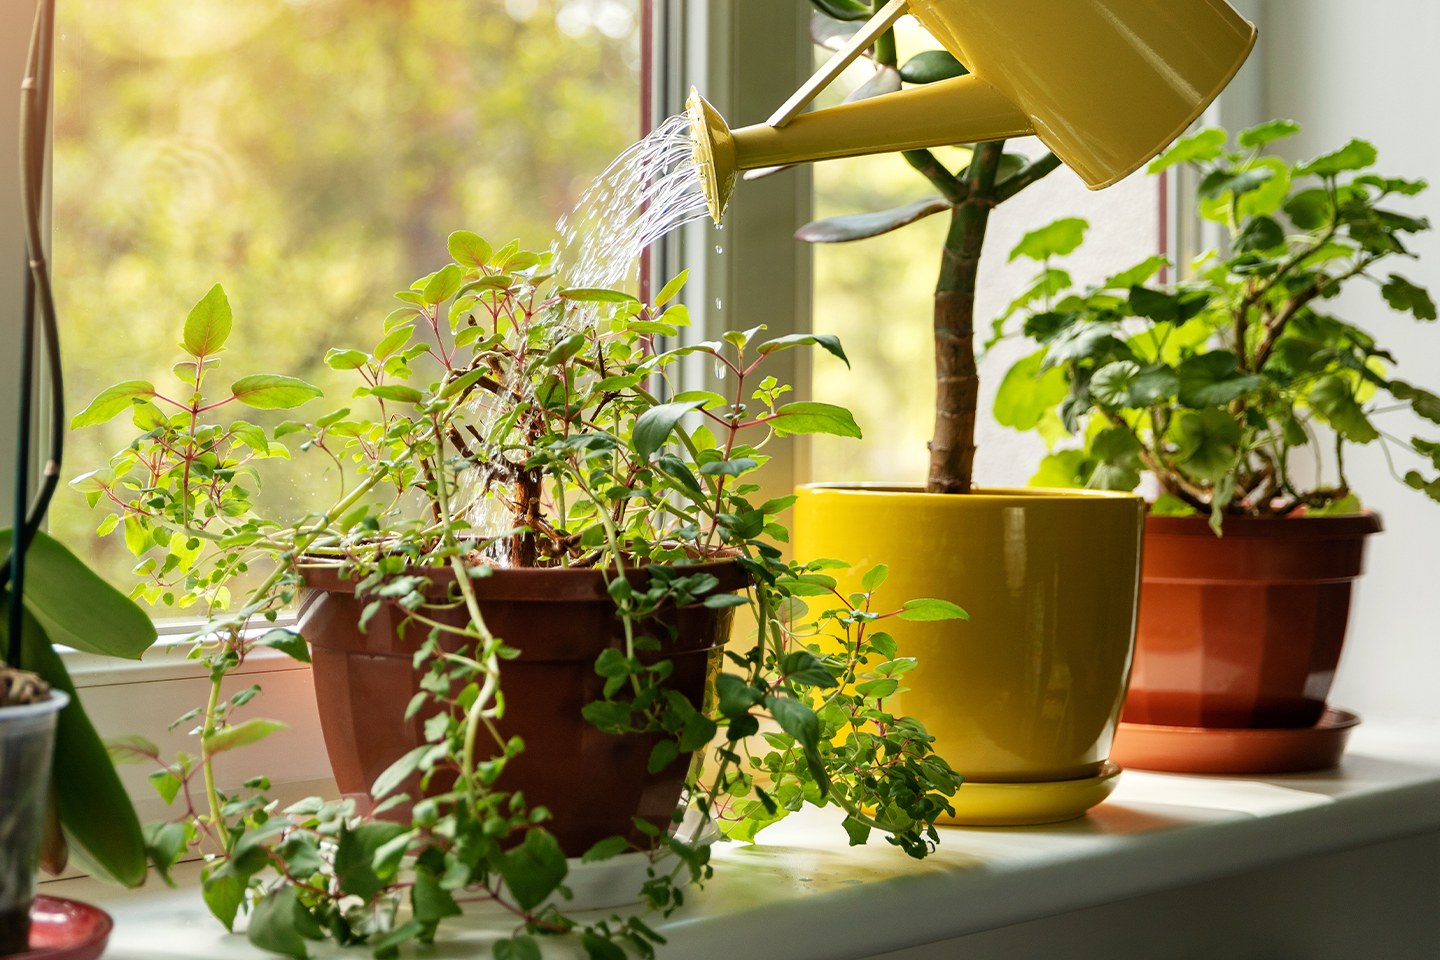 Bring the outdoors in with five styling tips that beautify your home and oxygenate the air.